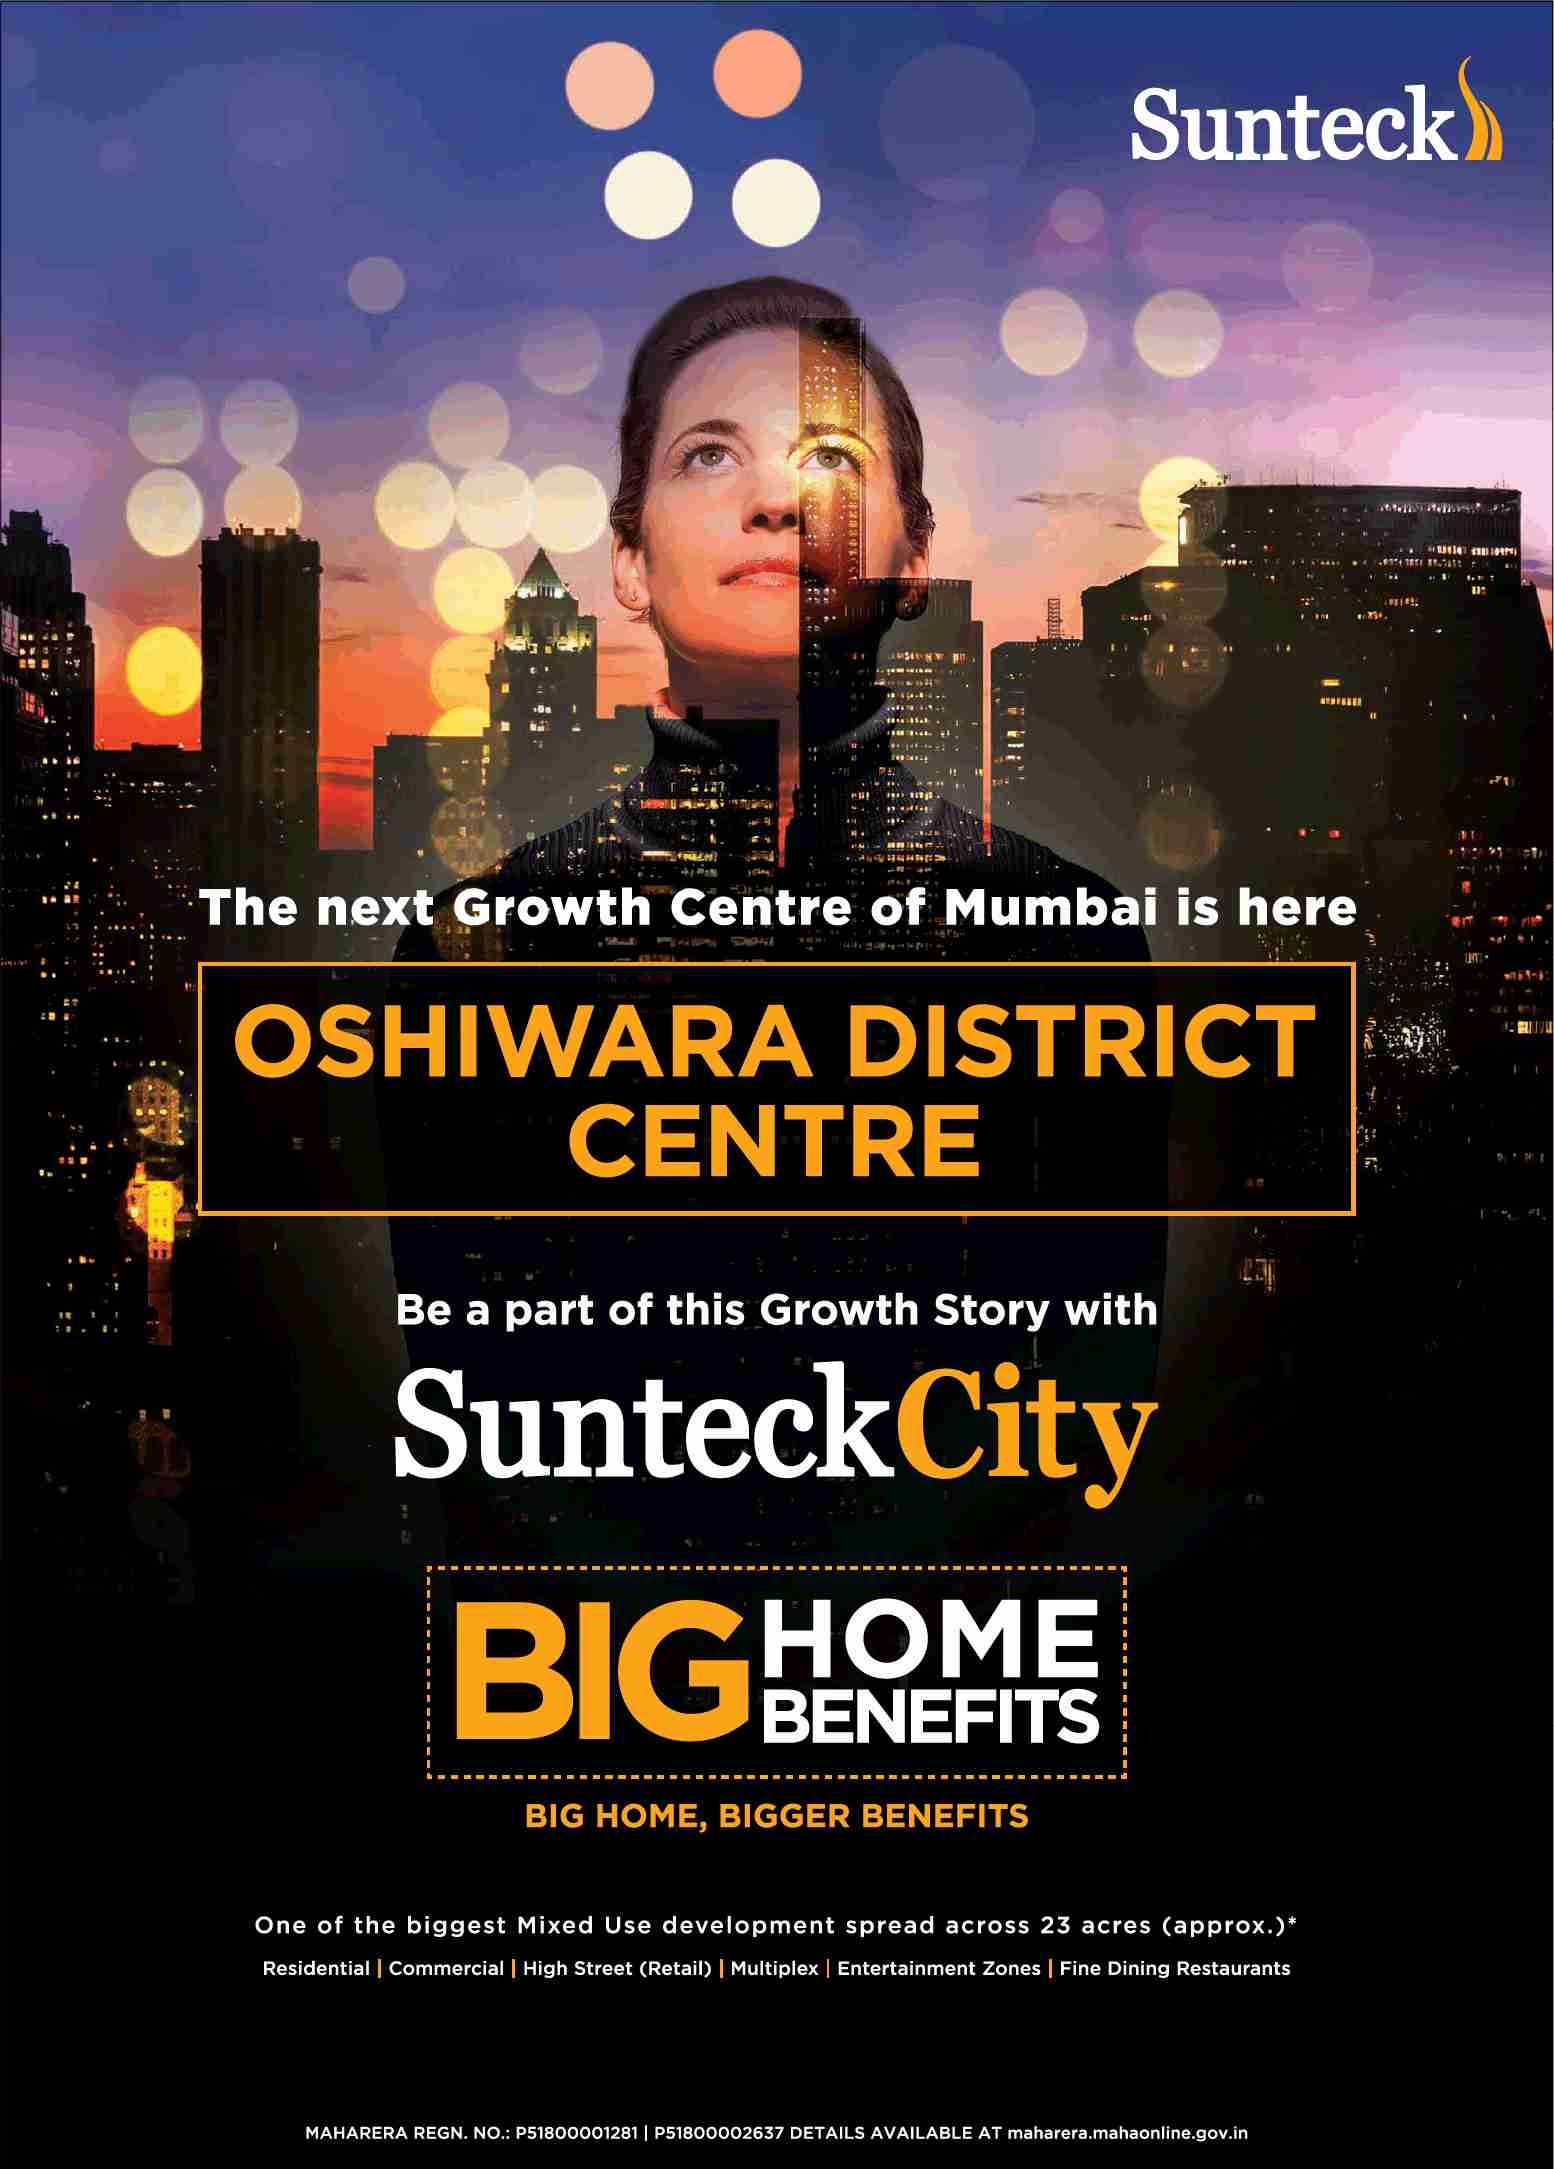 Live in big homes with bigger benefits at Sunteck City in Mumbai Update